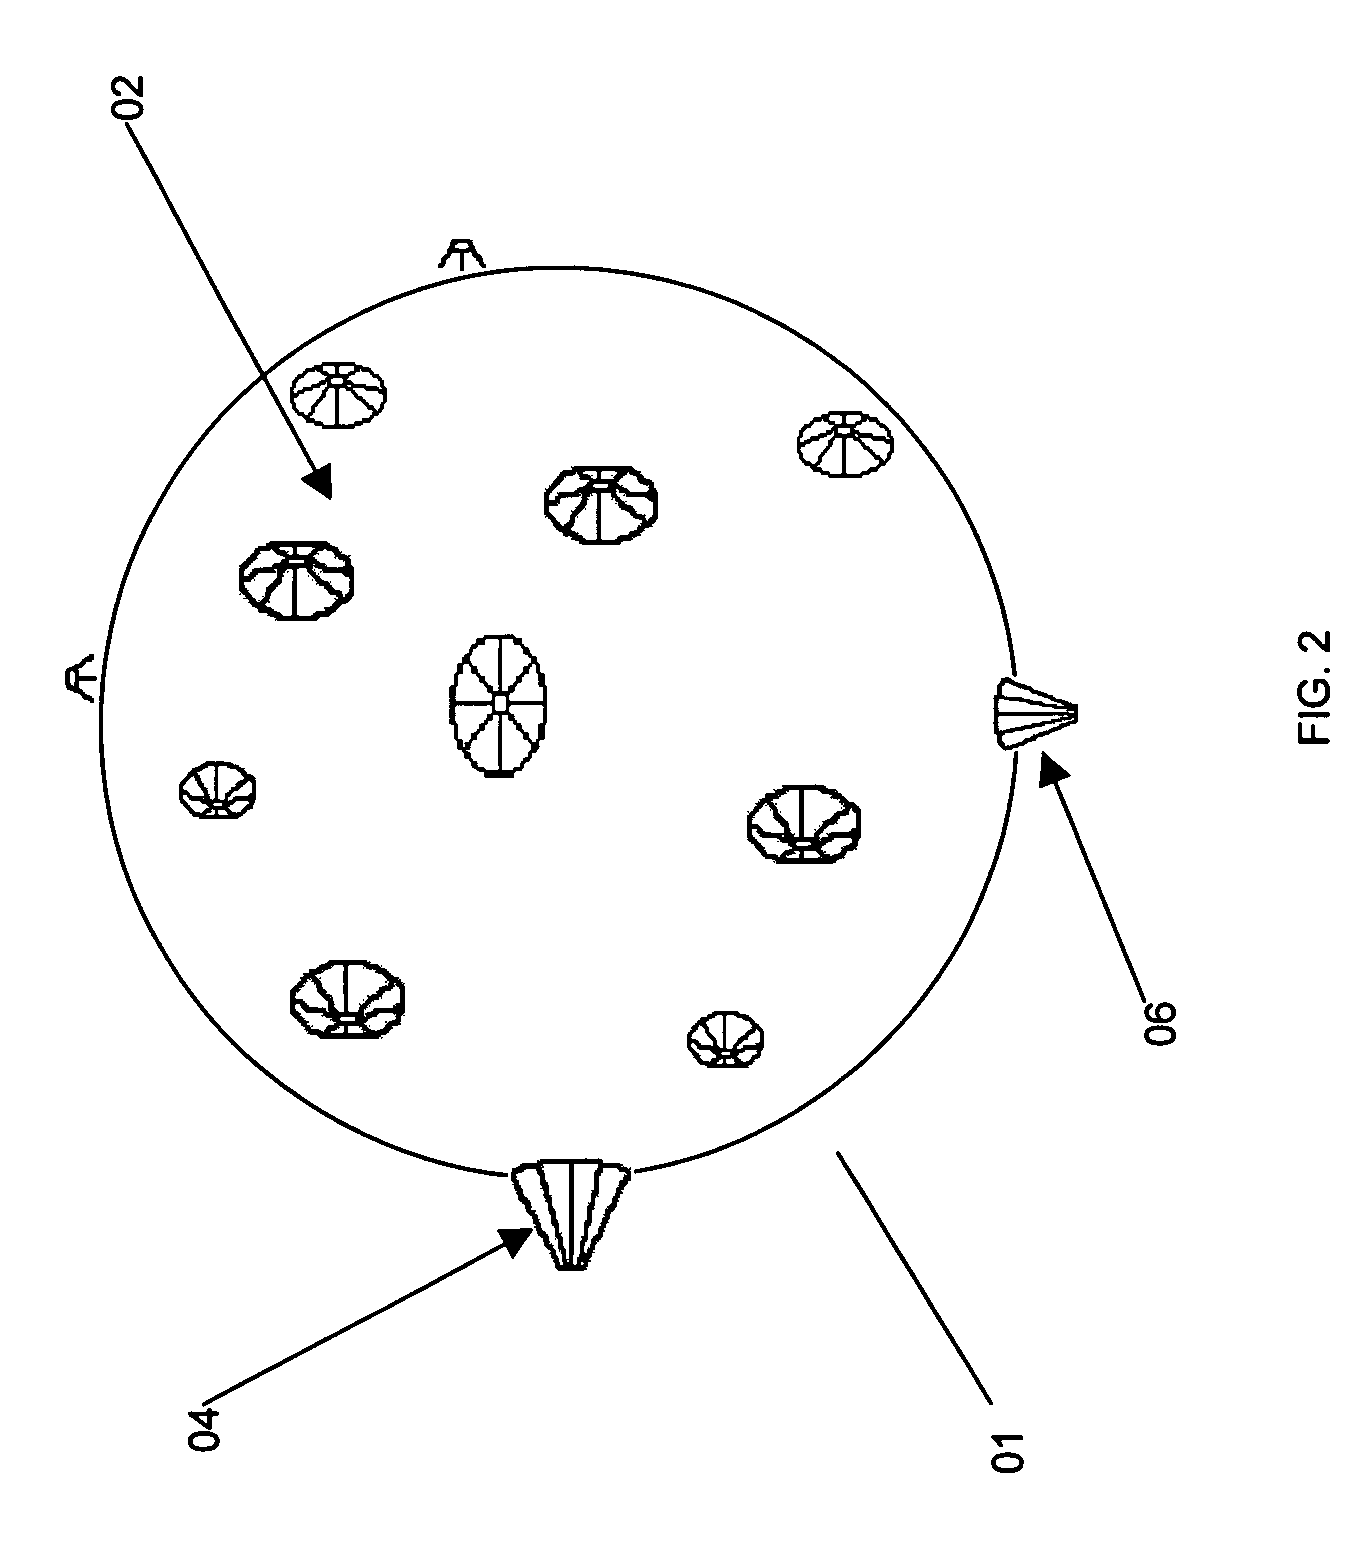 Mine clearing device incorporating unbiased motion